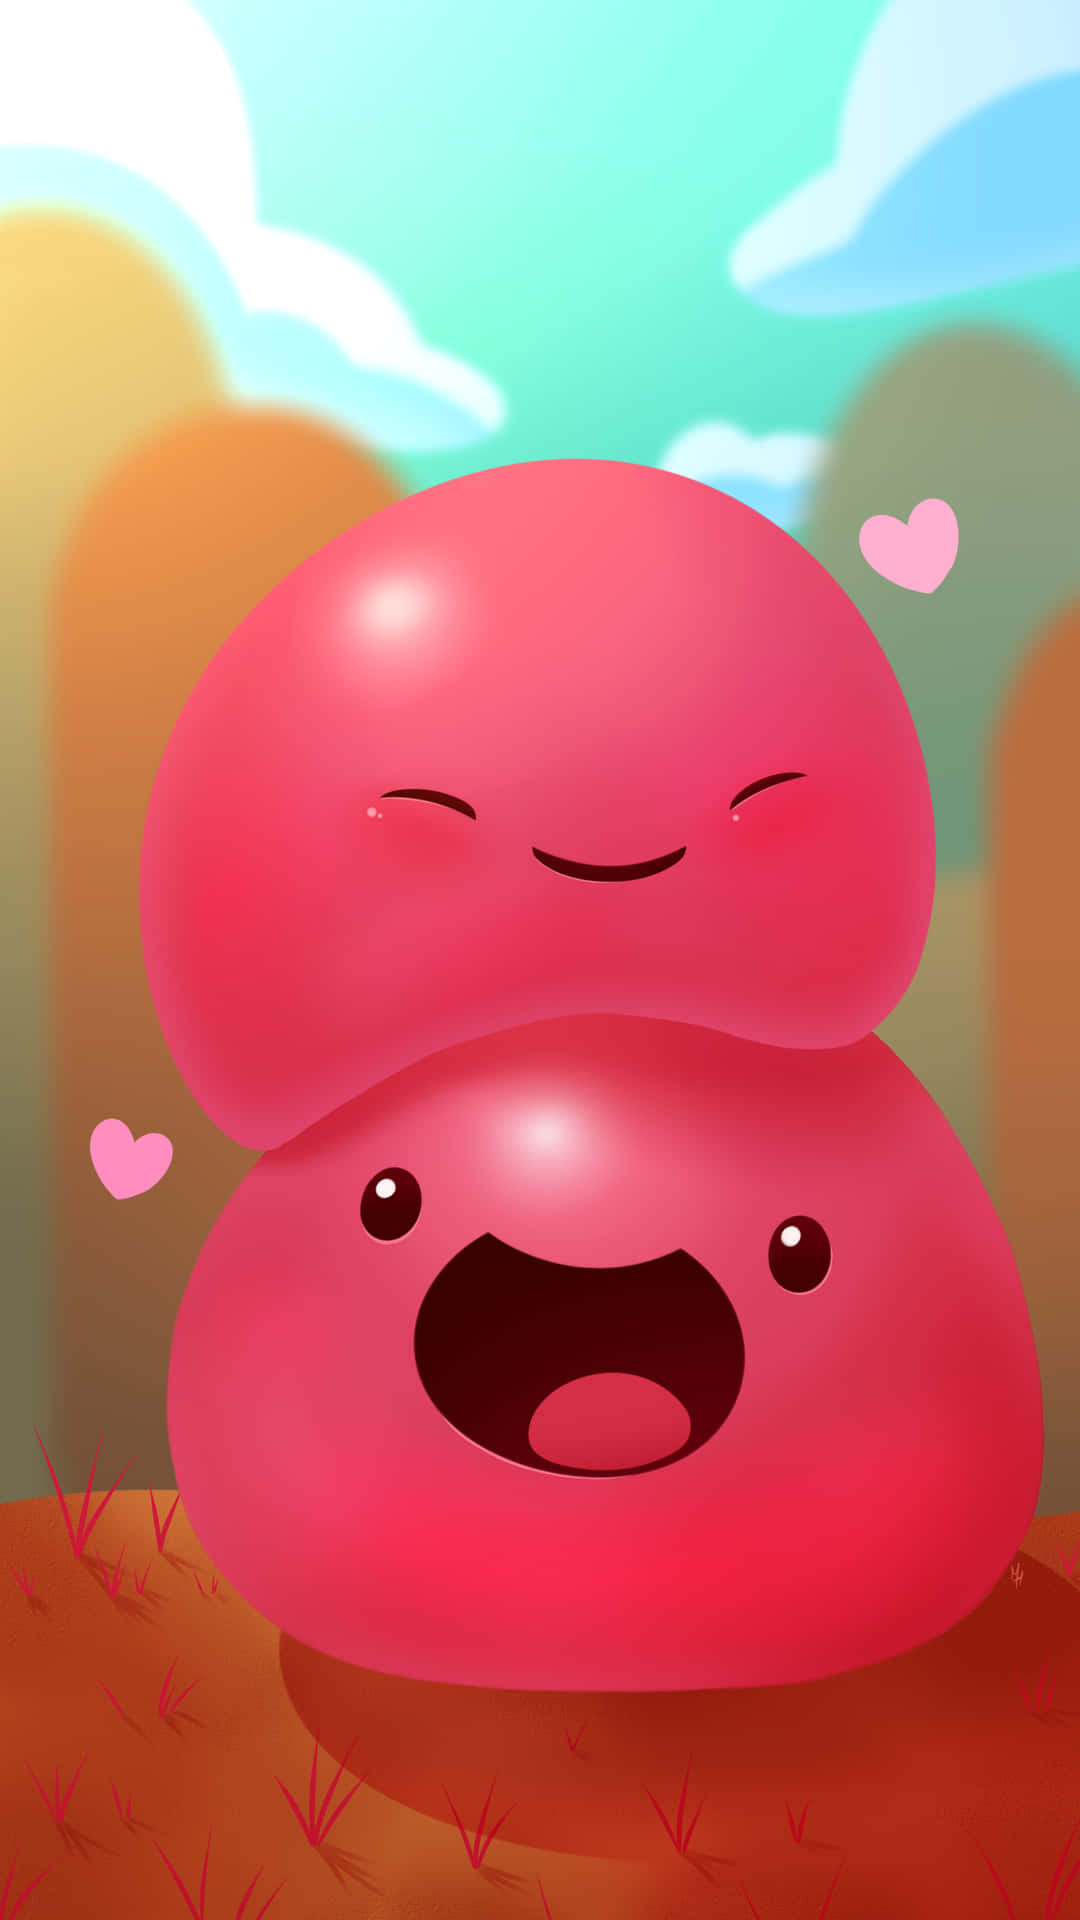 A Pink Kawaii Blob With A Smile On Its Face Wallpaper